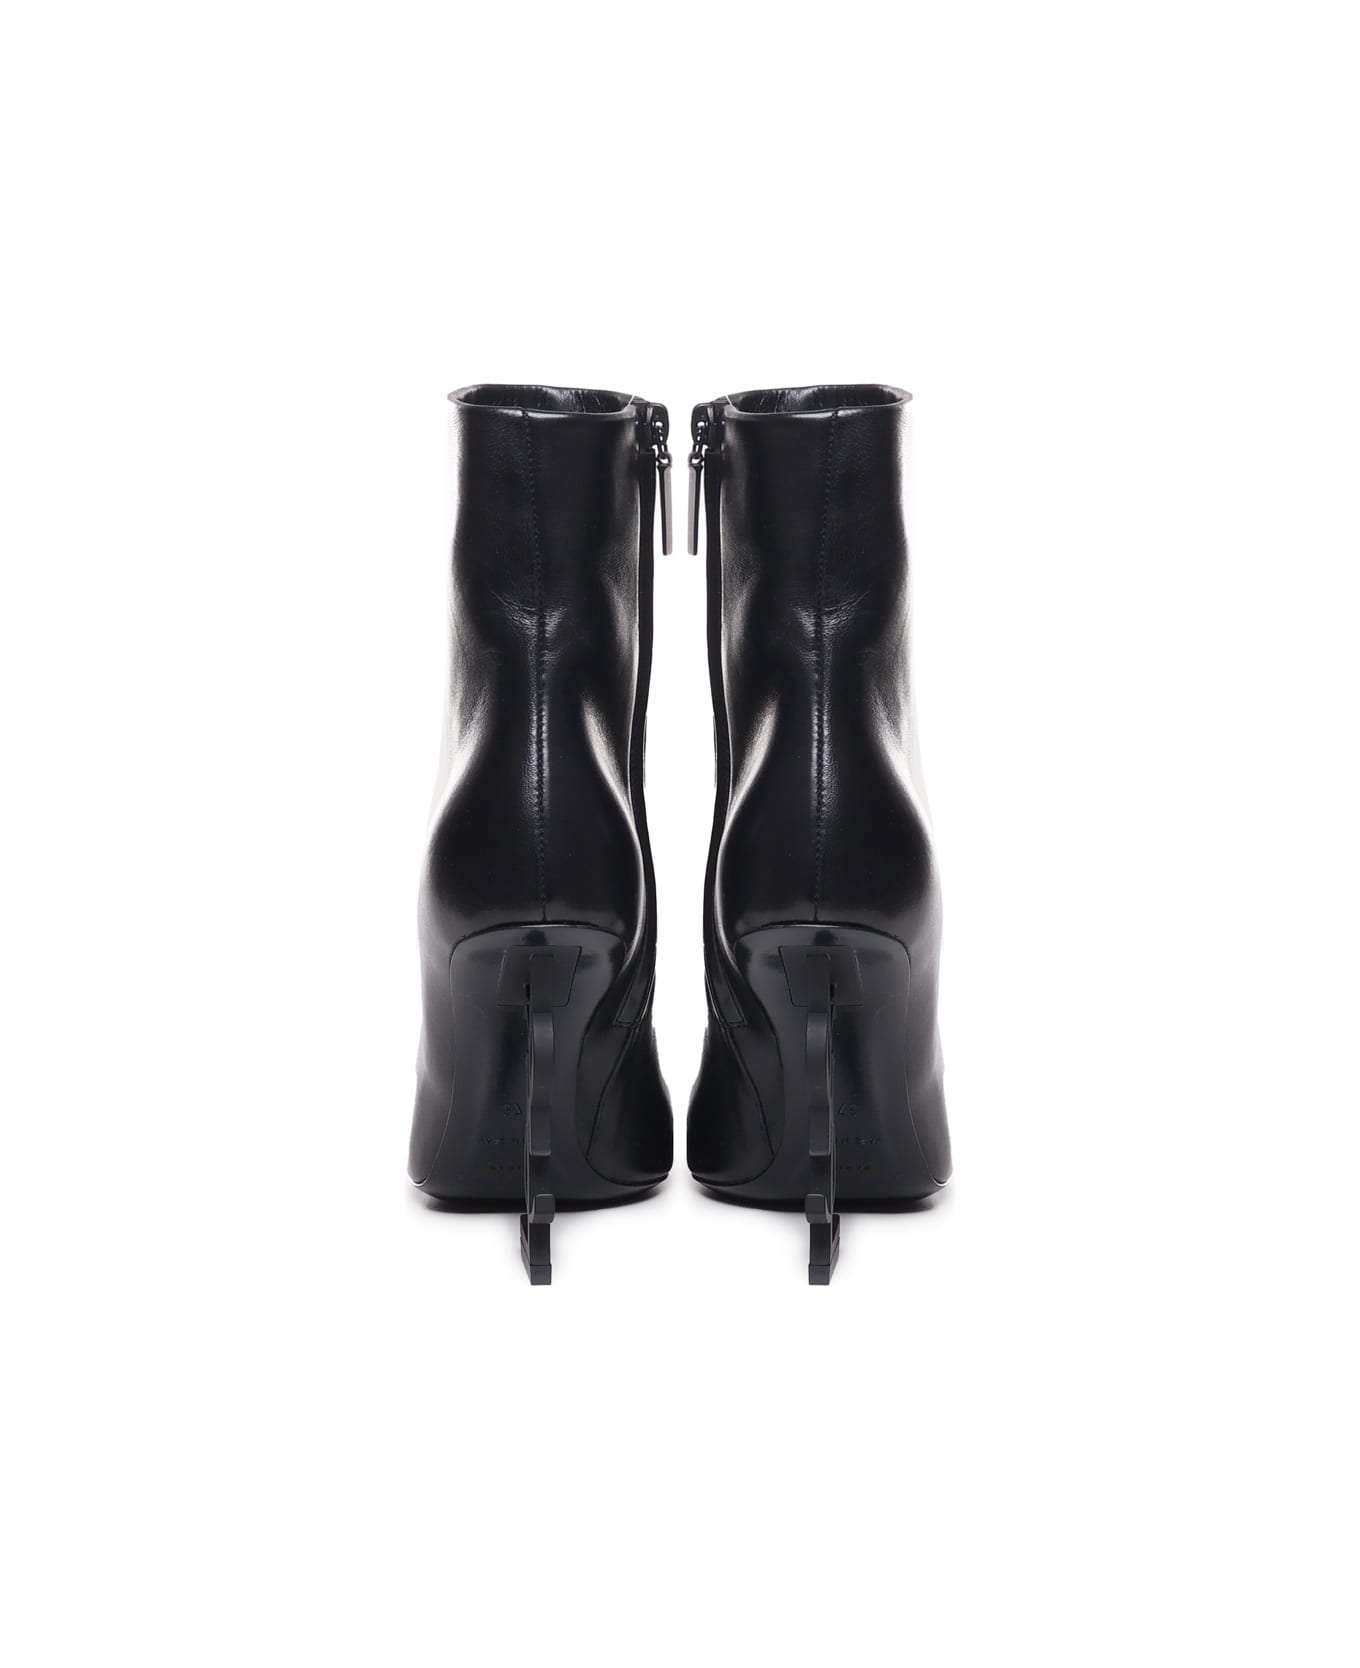 Saint Laurent Opyum Ankle Boots In Calfskin - Black ブーツ